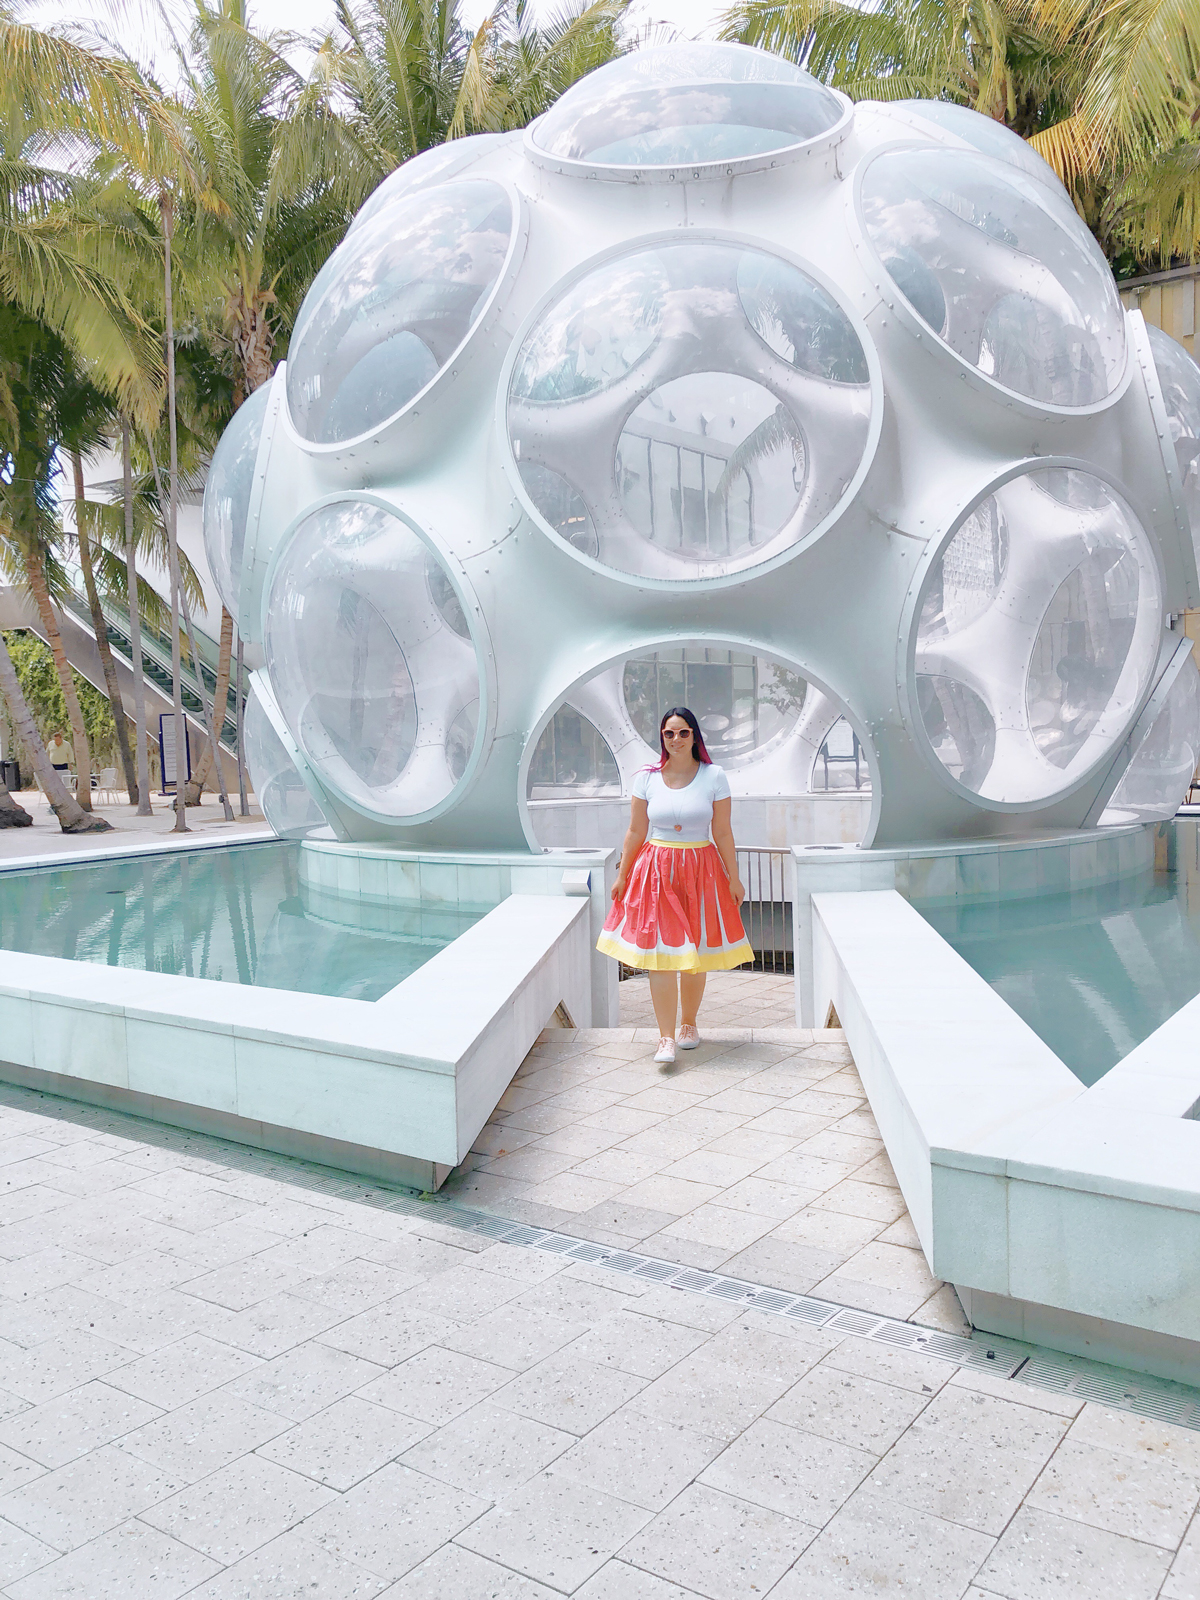 Top five spots to take pictures in Miami Design District - Caplin News